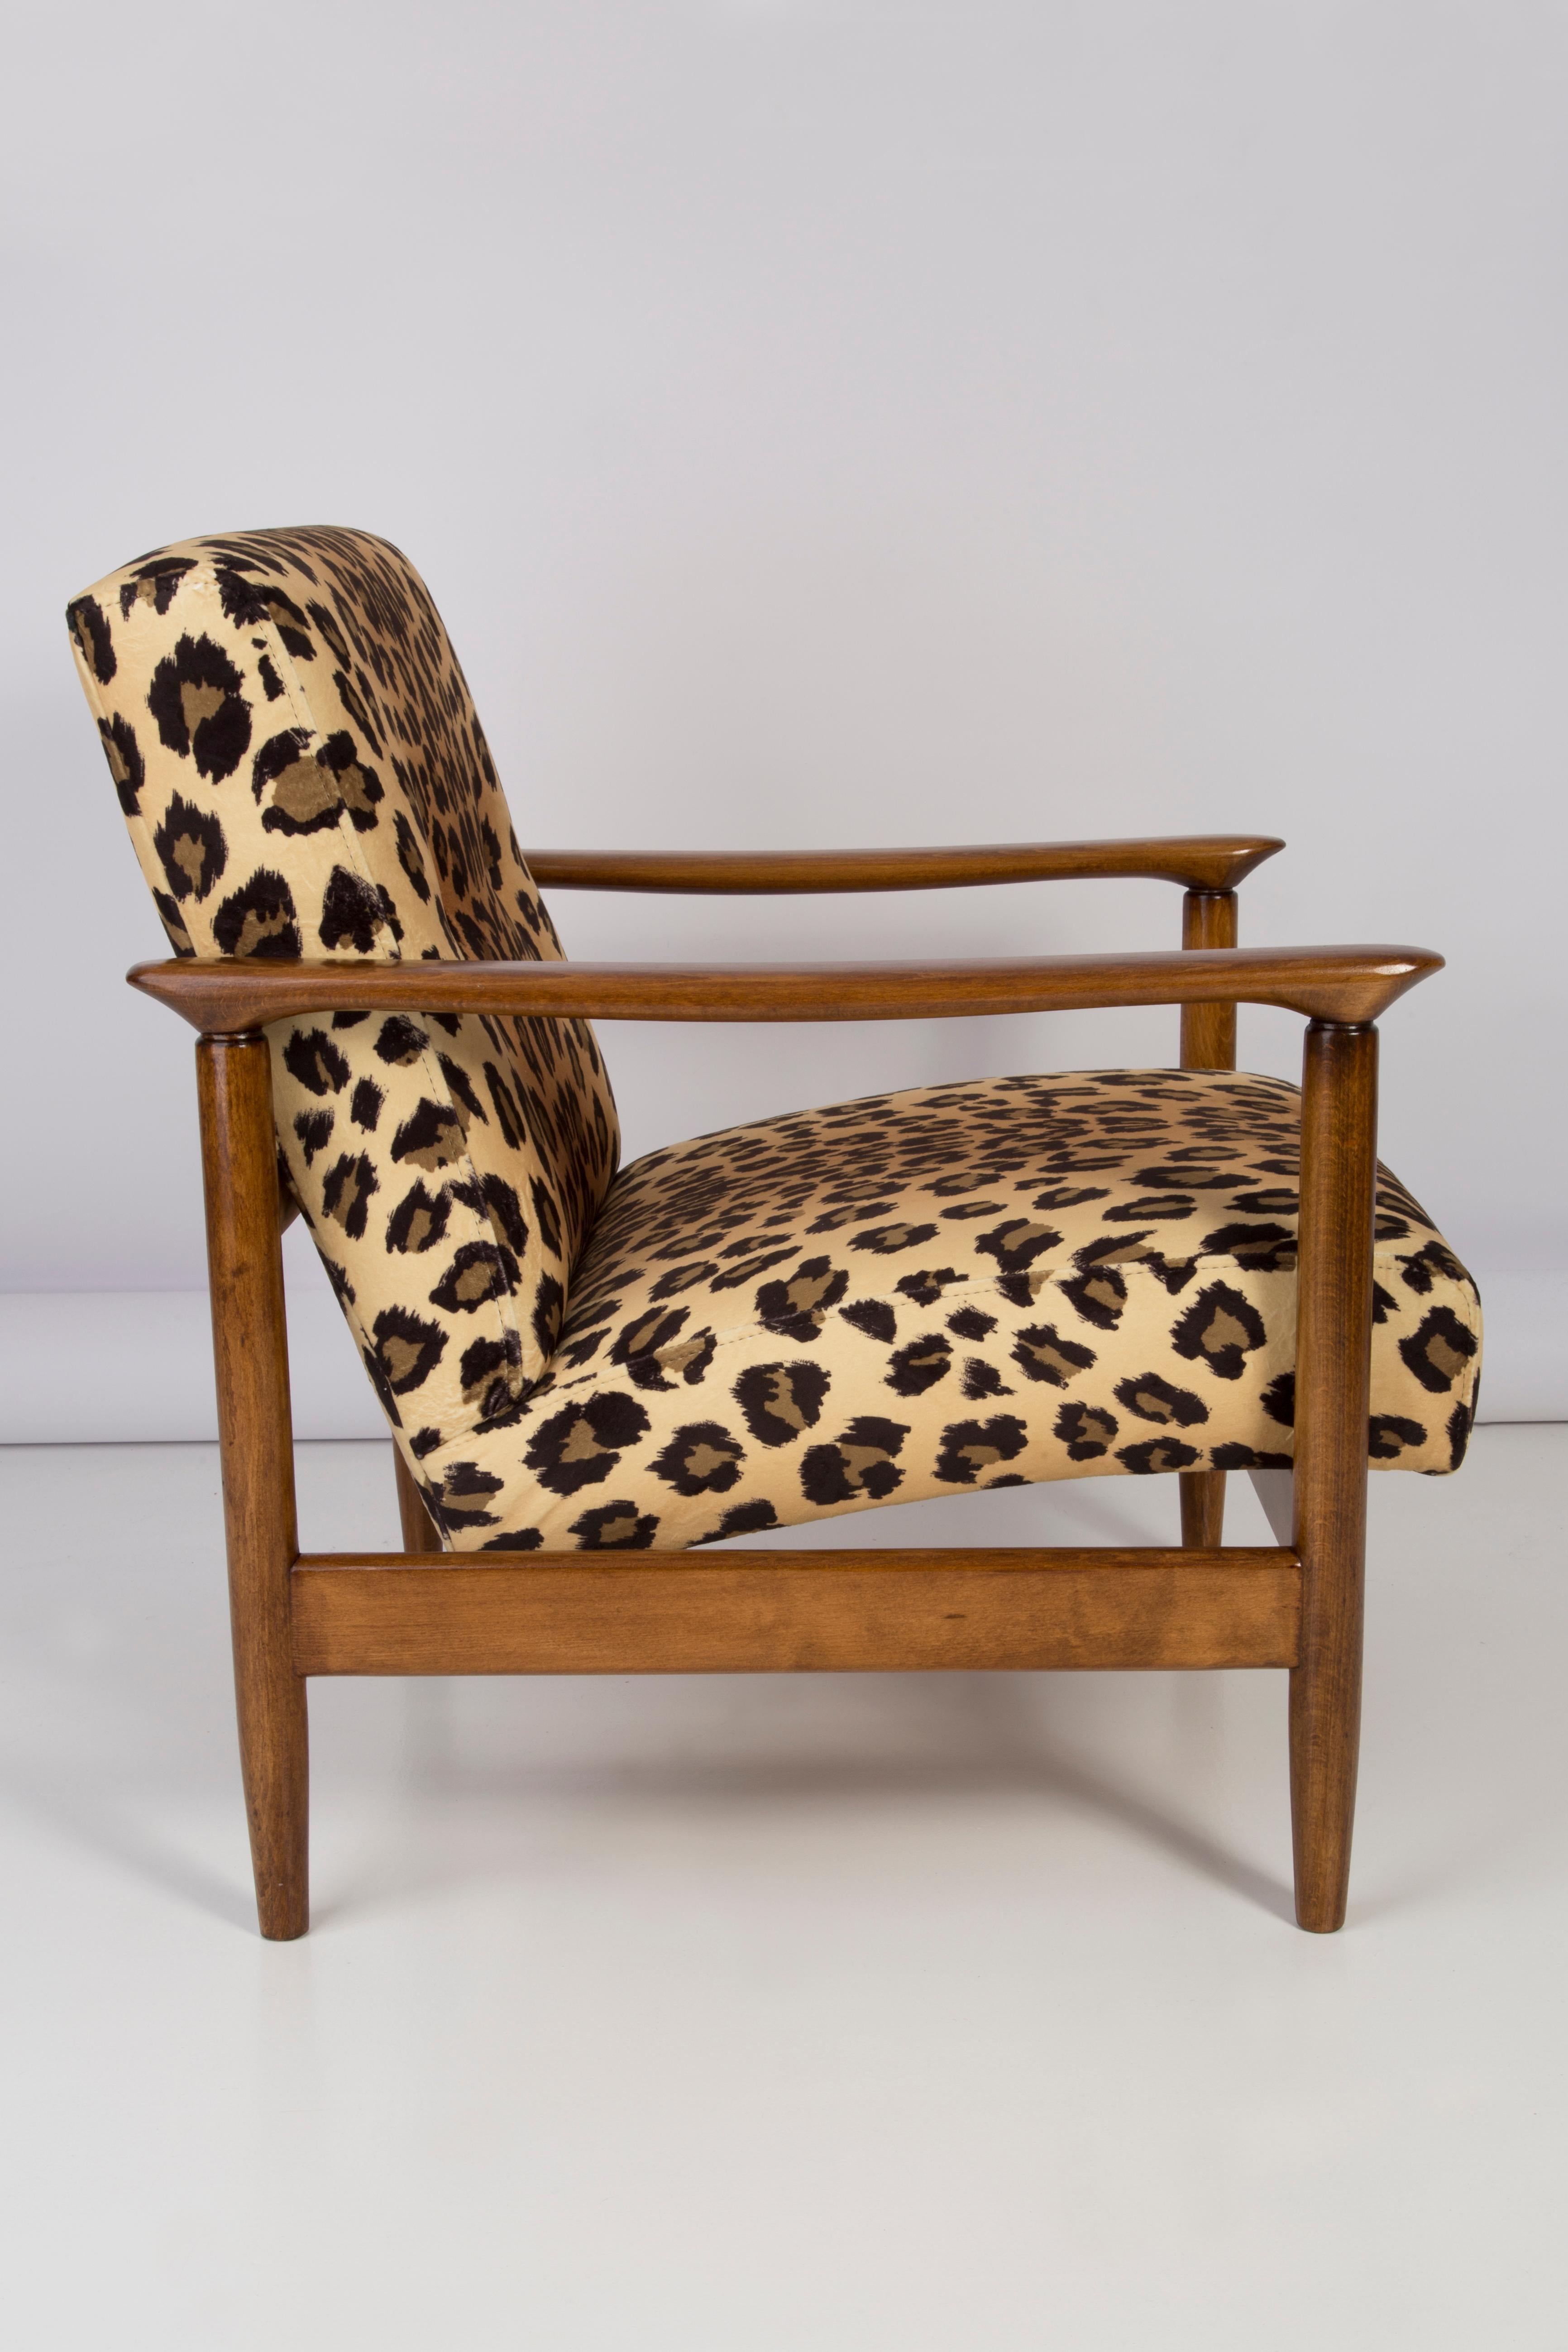 A pair of armchairs GFM-142 leopard armchairs, designed by Edmund Homa, a polish architect, designer of Industrial Design and interior architecture, professor at the Academy of Fine Arts in Gdansk.

The armchairs were made in the 1960s in the